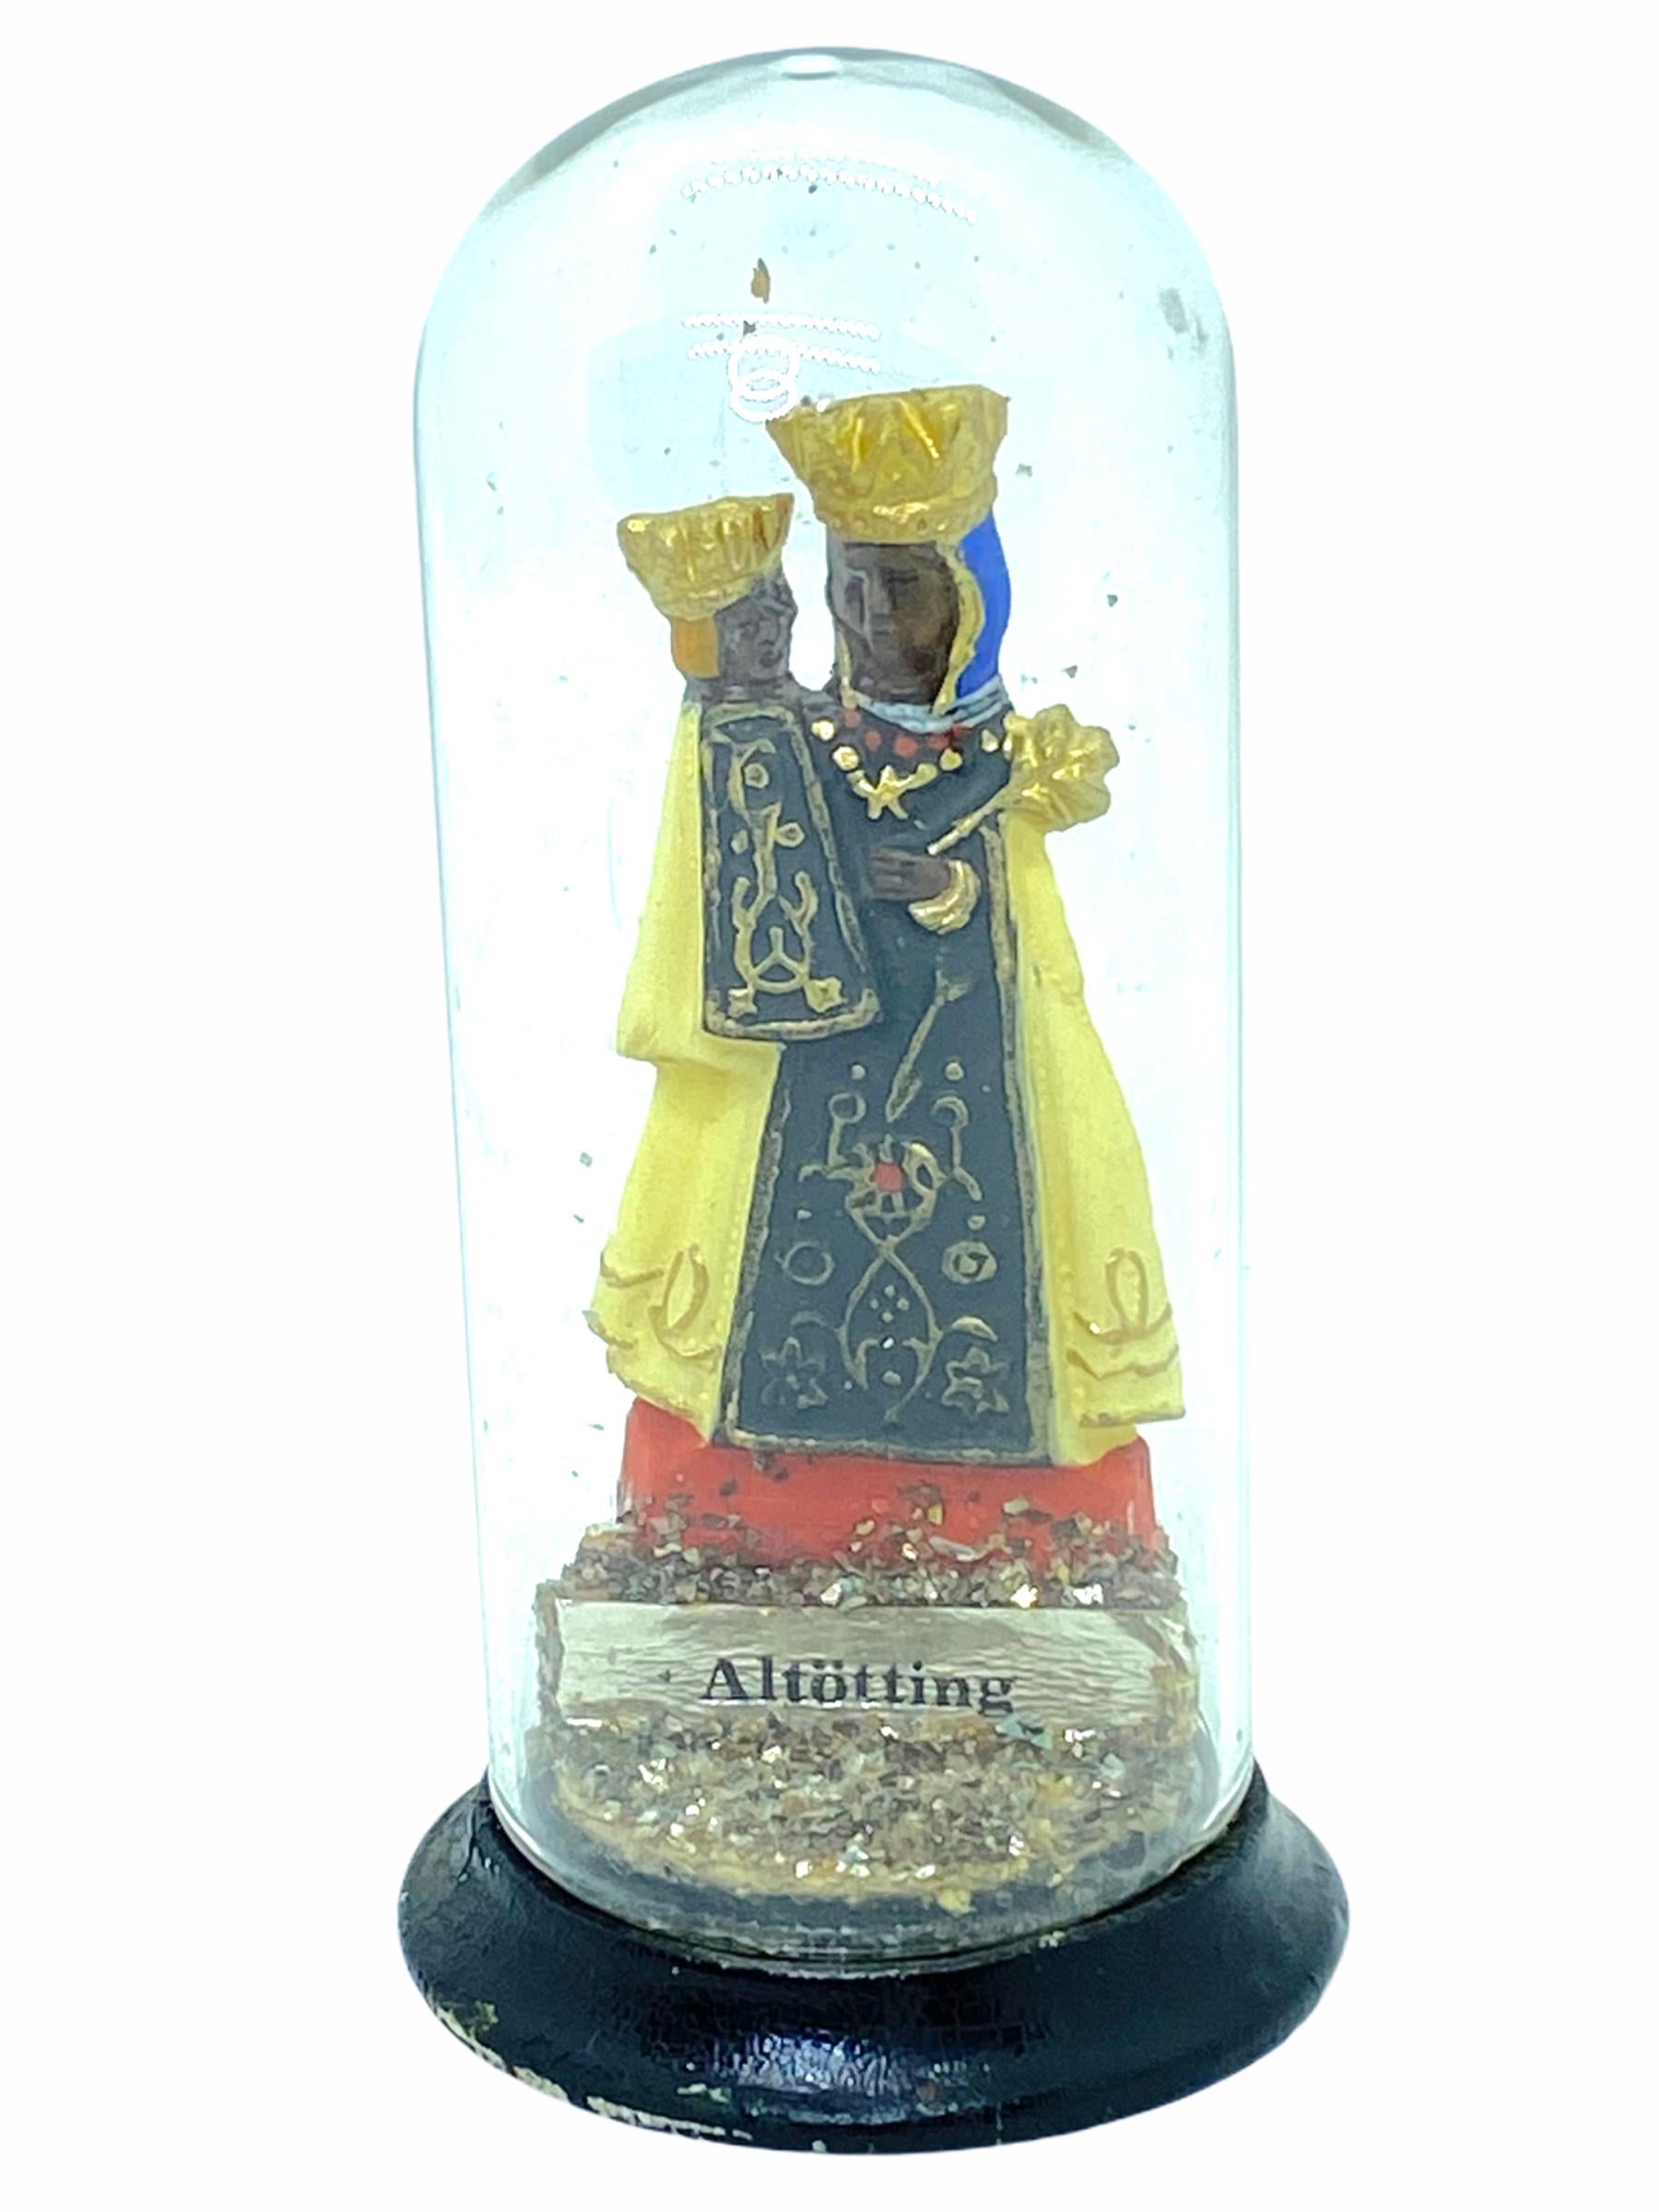 An antique glass dome with Virgin Mary figure found at an estate sale in Nuremberg, Germany. We believe it is a monastery work, handmade by a nun. A nice addition to your home altar or any room.